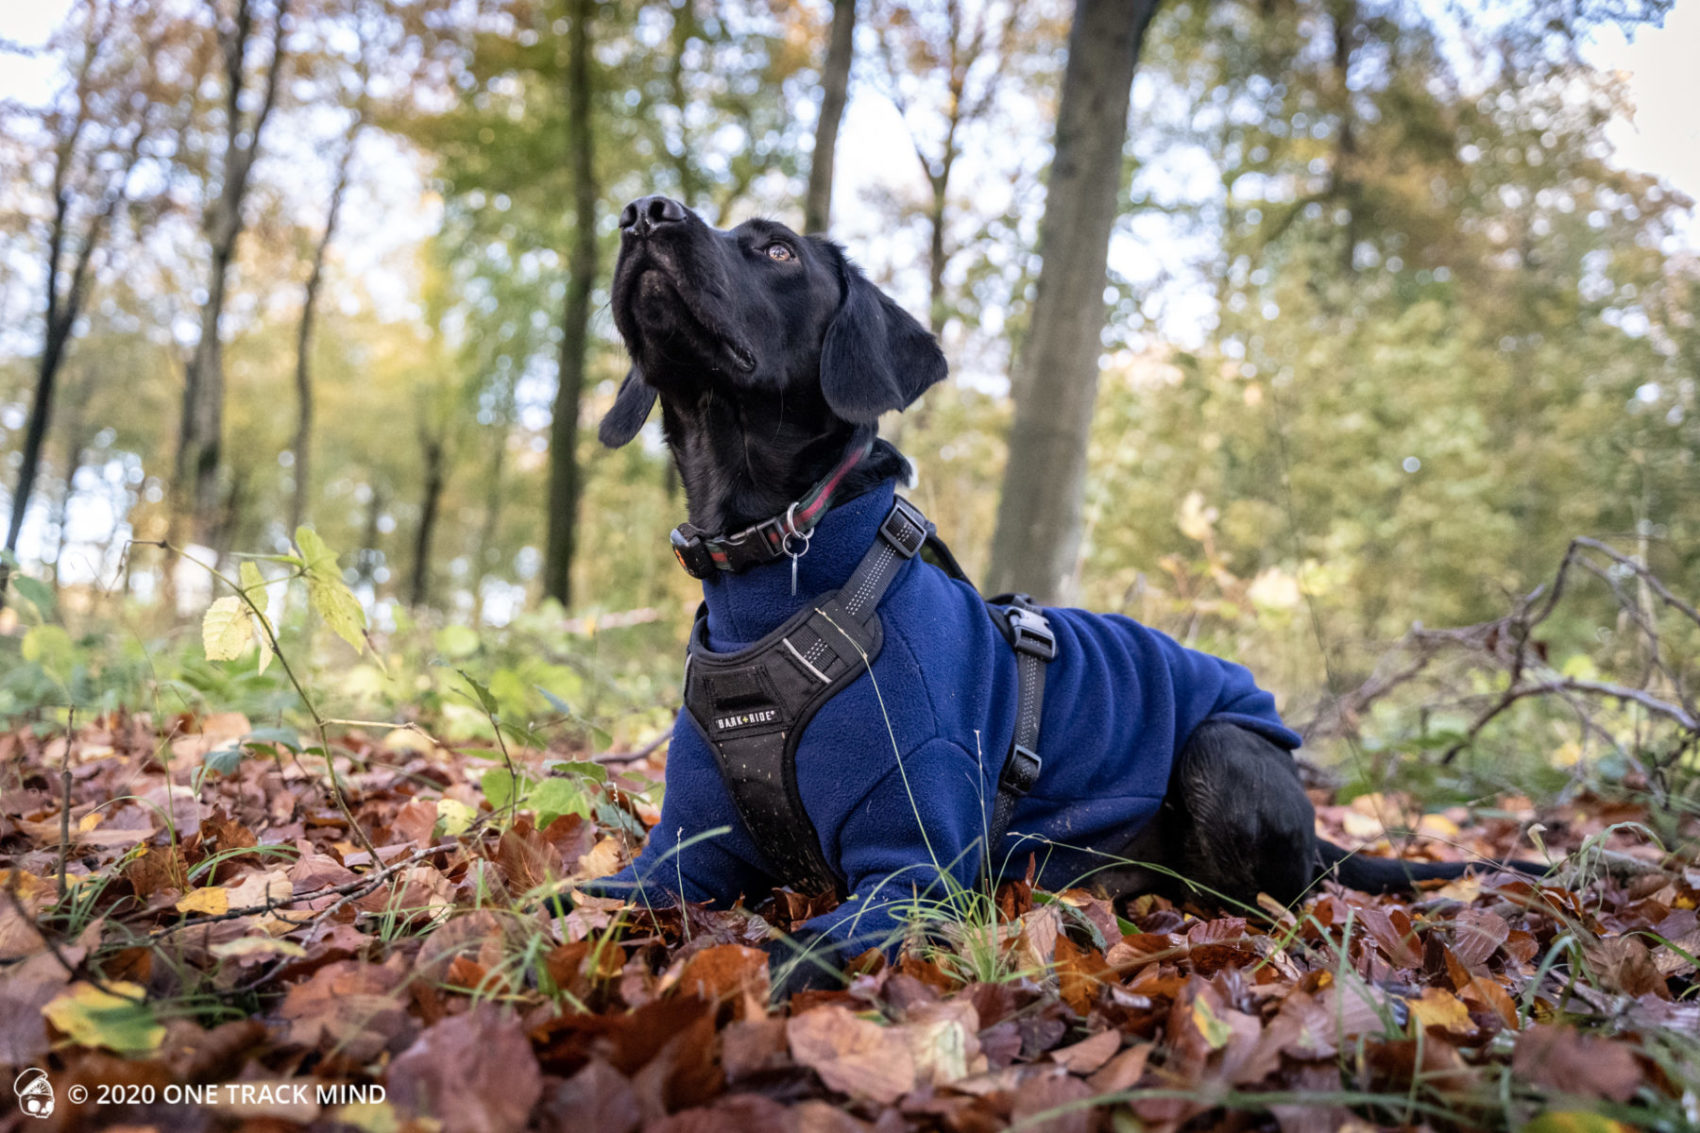 Bark + Ride Lewis Adventure Harness Review